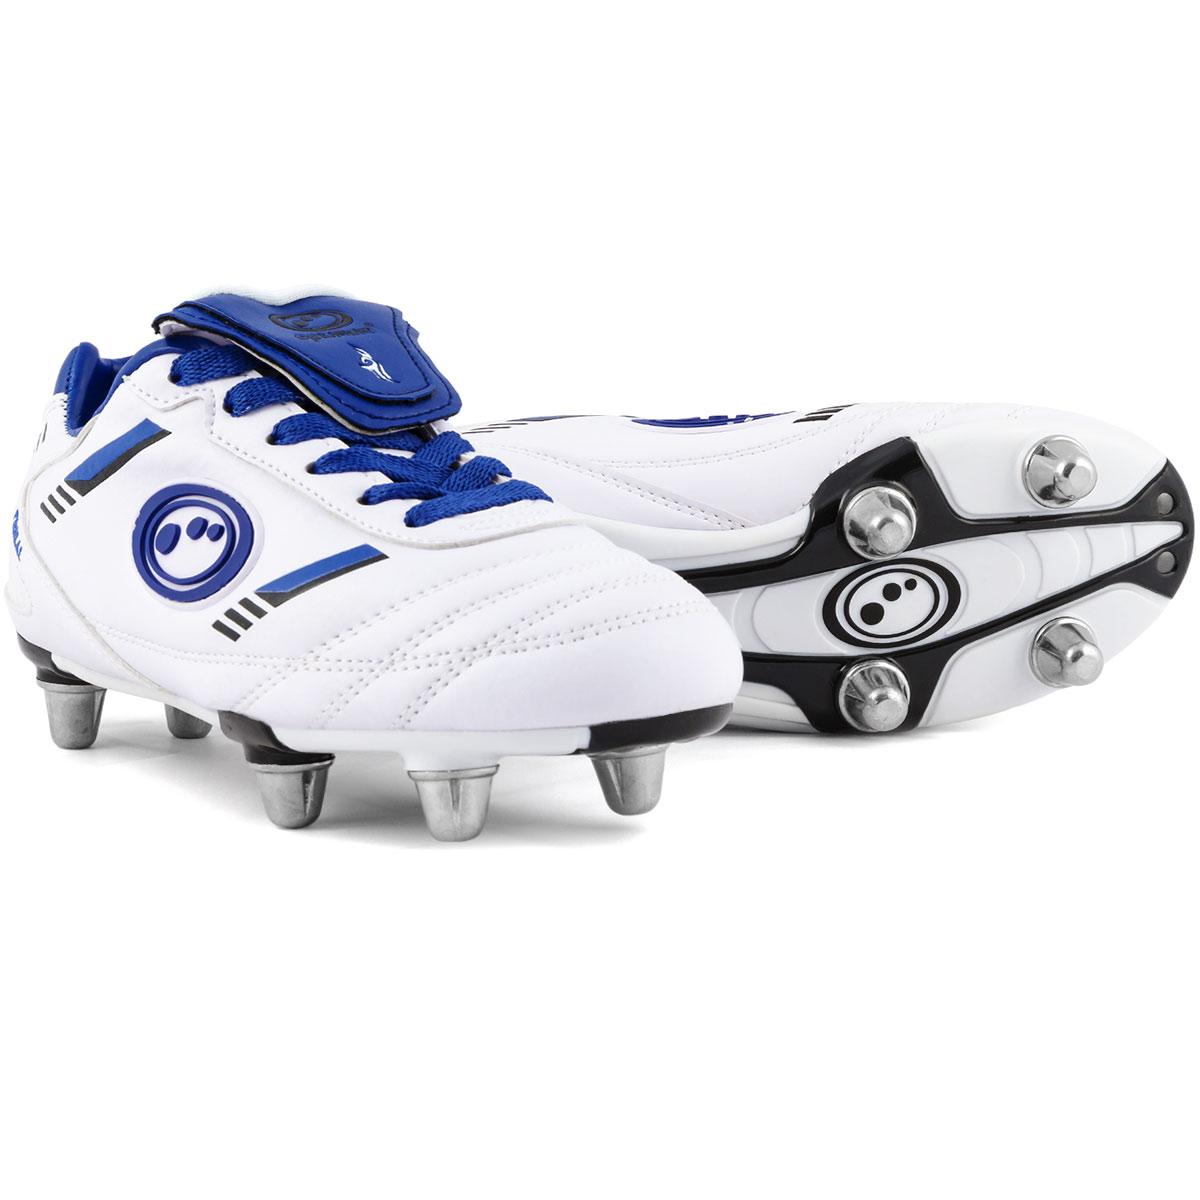 Optimum junior rugby boot tribal white blue or black red